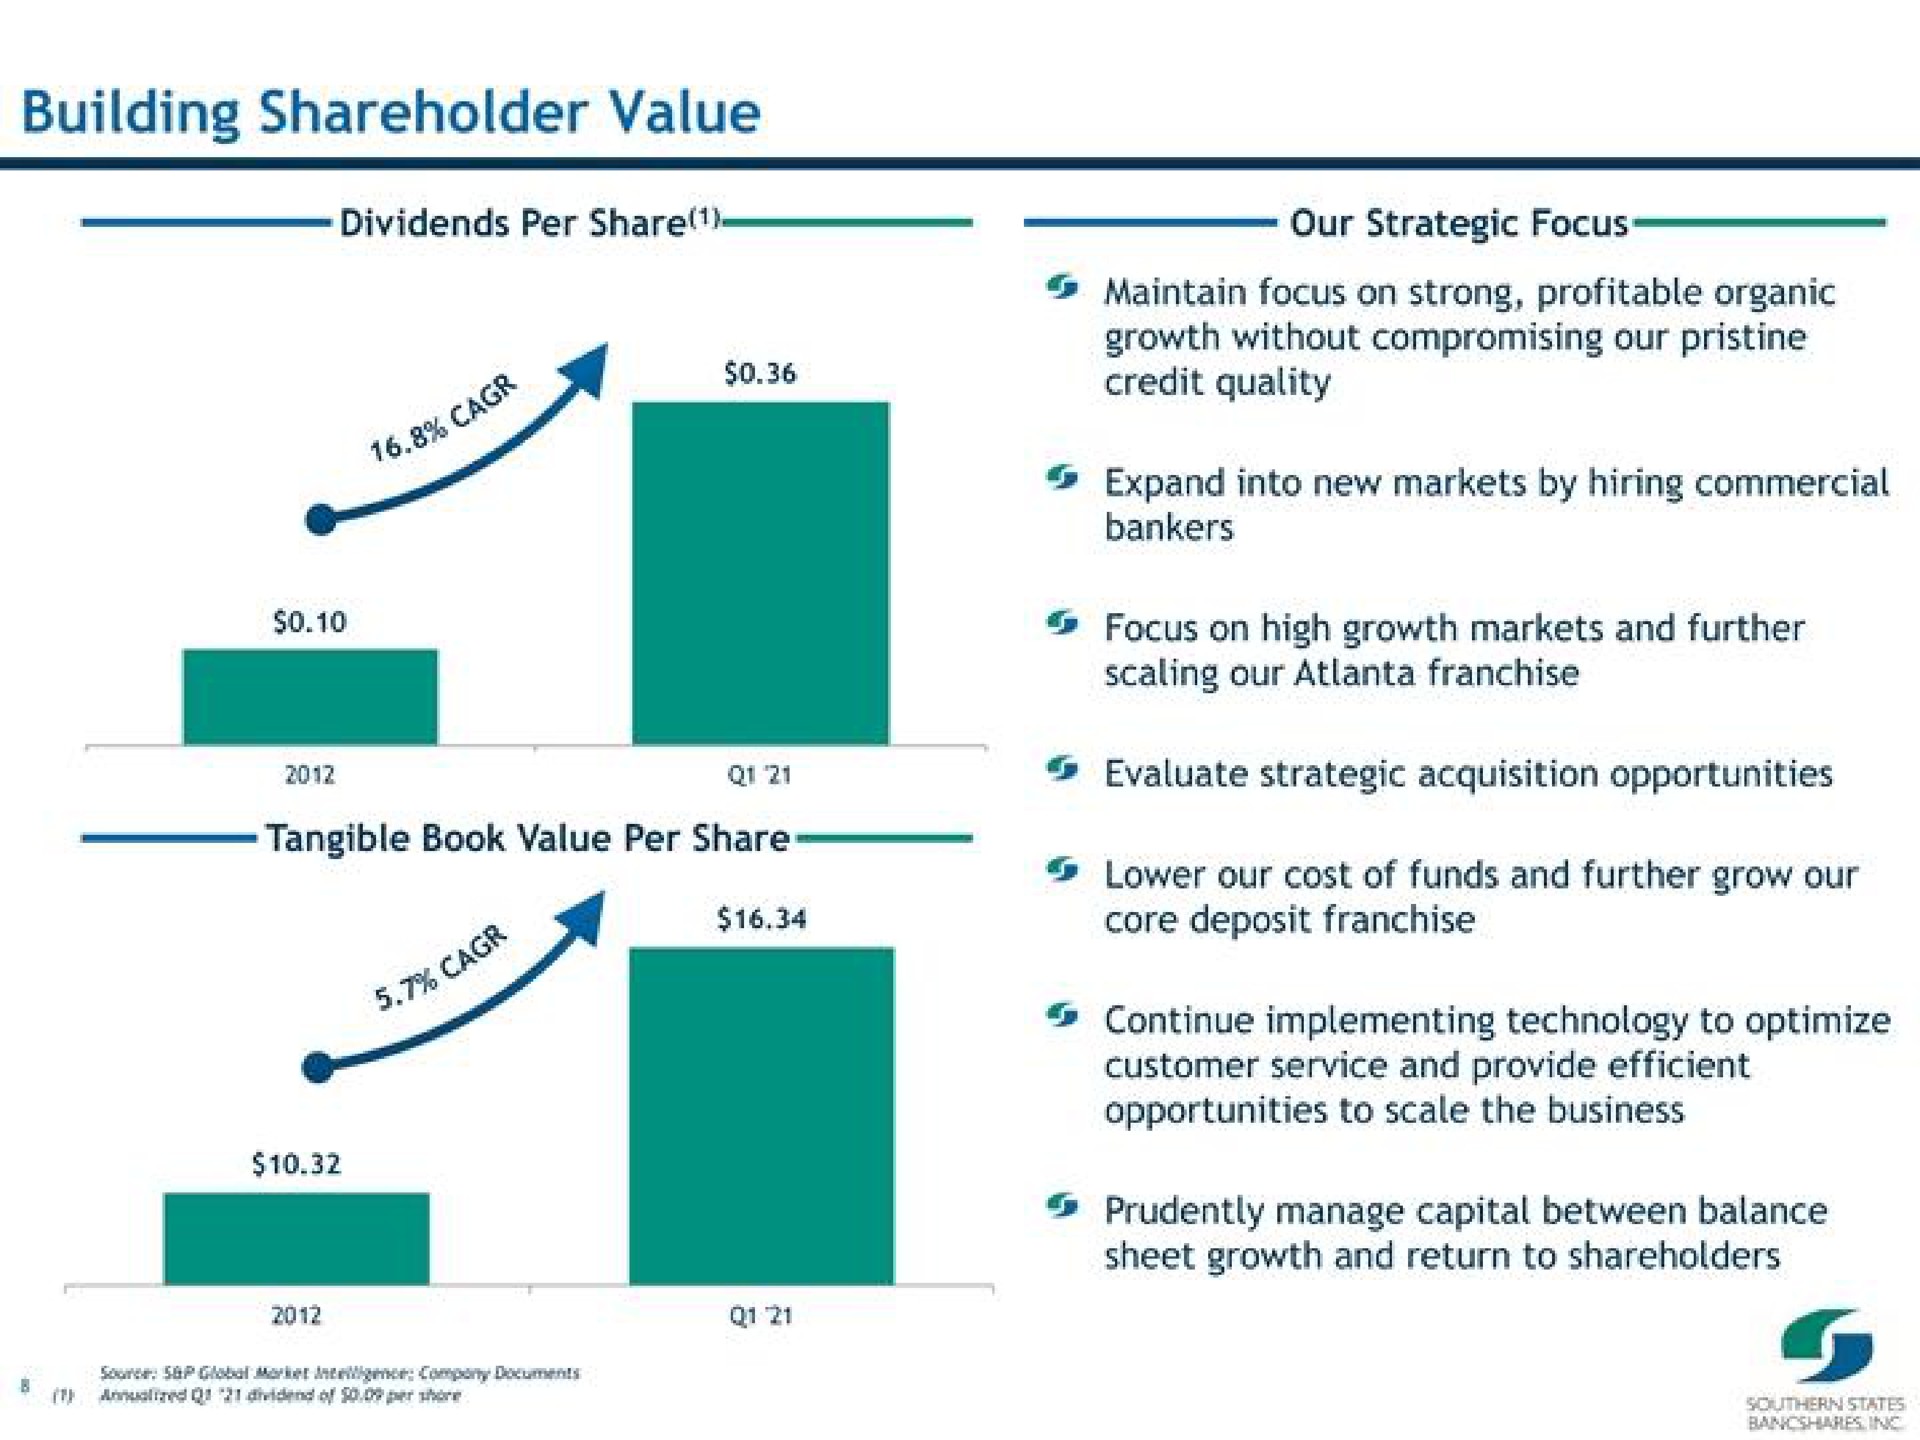 building shareholder value dividends per share our strategic focus maintain focus on strong profitable organic growth without compromising our pristine credit quality expand into new markets by hiring commercial bankers focus on high growth markets and further scaling our franchise tangible book value per share core deposit franchise lower our cost of funds and further grow our continue implementing technology to optimize customer service and provide efficient opportunities to scale the business prudently manage capital between balance sheet growth and return to shareholders | Southern States Bancshares